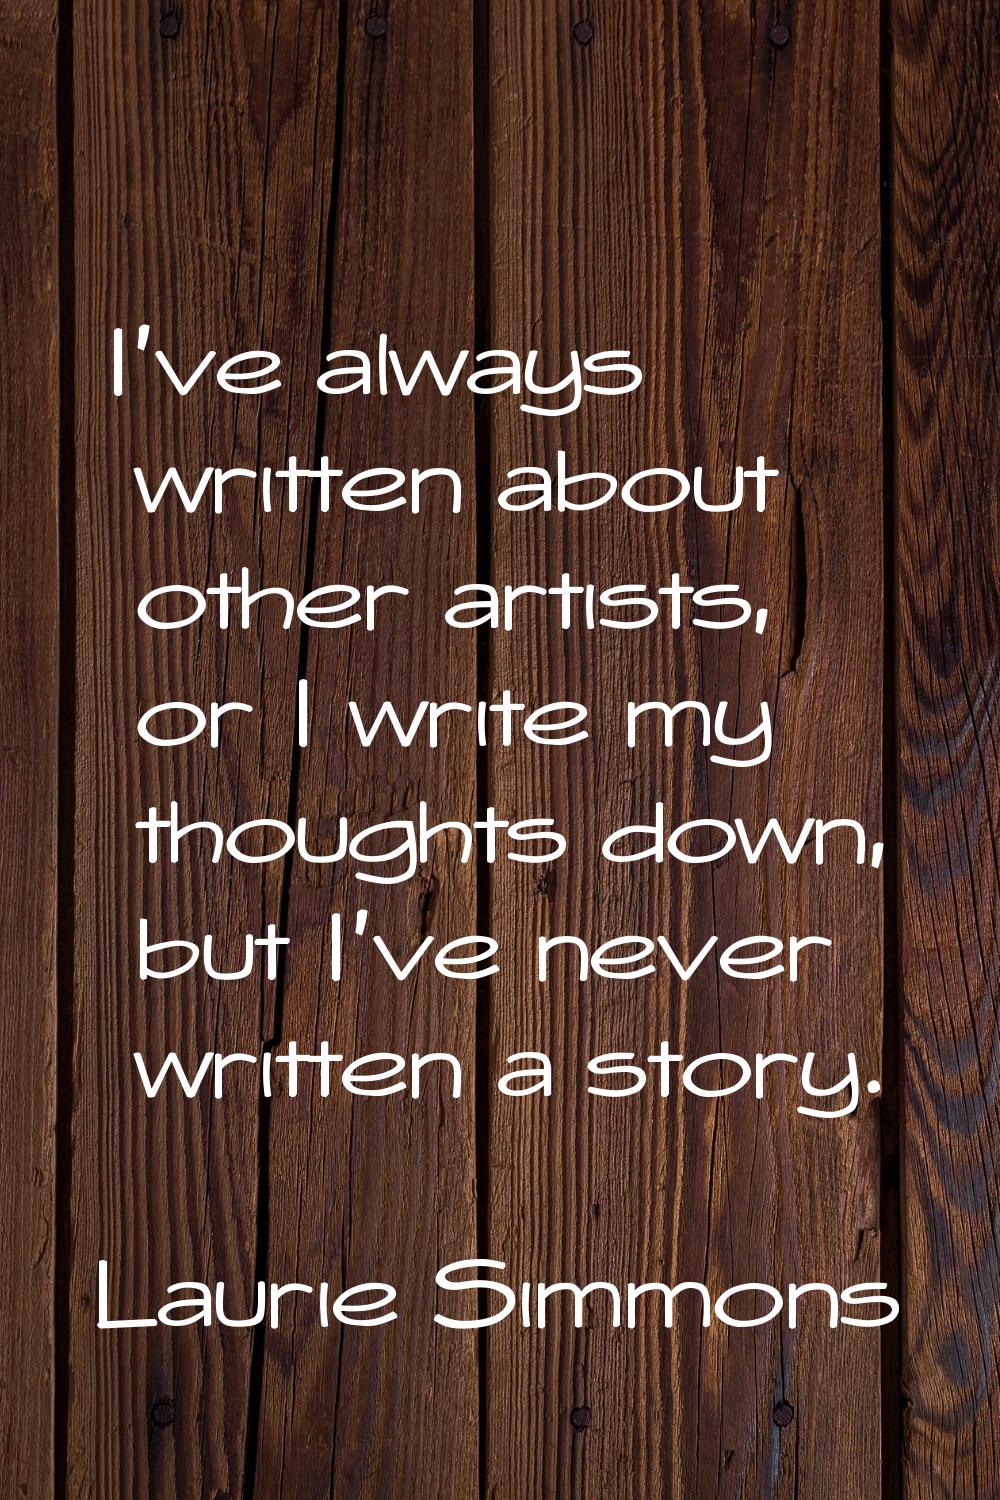 I've always written about other artists, or I write my thoughts down, but I've never written a stor